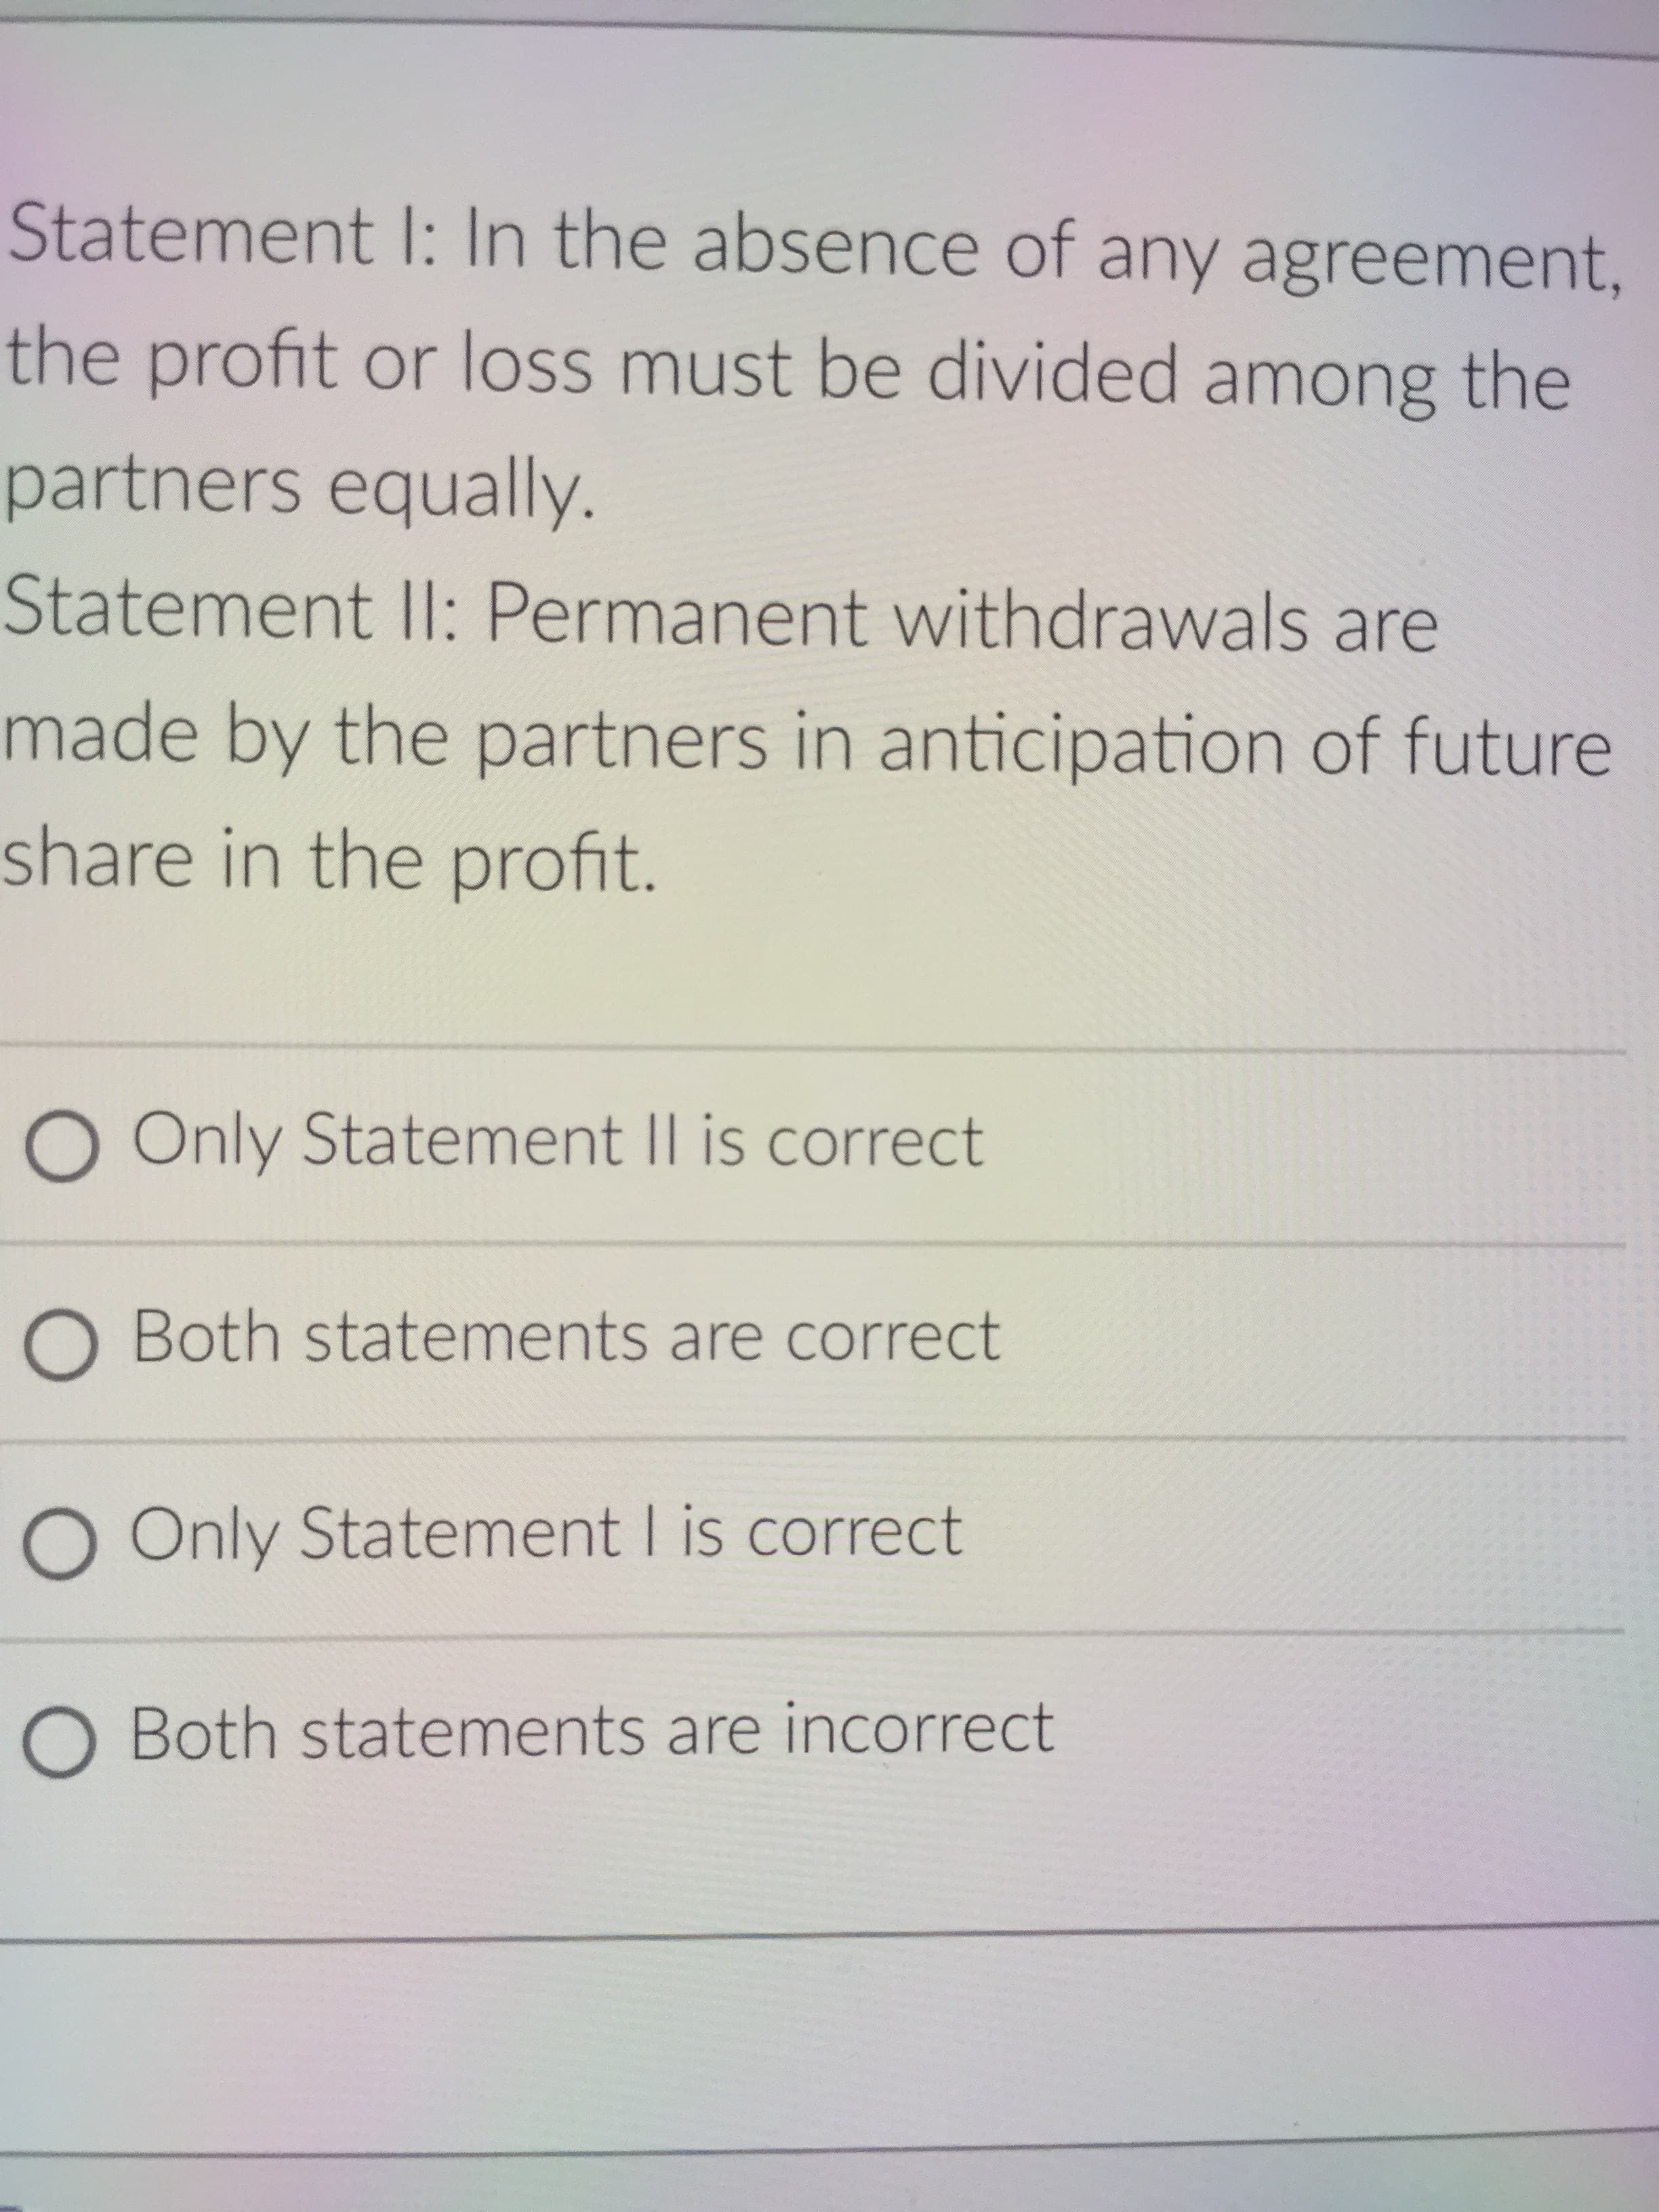 Statement I: In the absence of any agreement,
the profit or loss must be divided among the
partners equally.
Statement Il: Permanent withdrawals are
made by the partners in anticipation of future
share in the profit.
O Only Statement II is correct
O Both statements are correct
O Only Statement I is correct
O Both statements are incorrect
